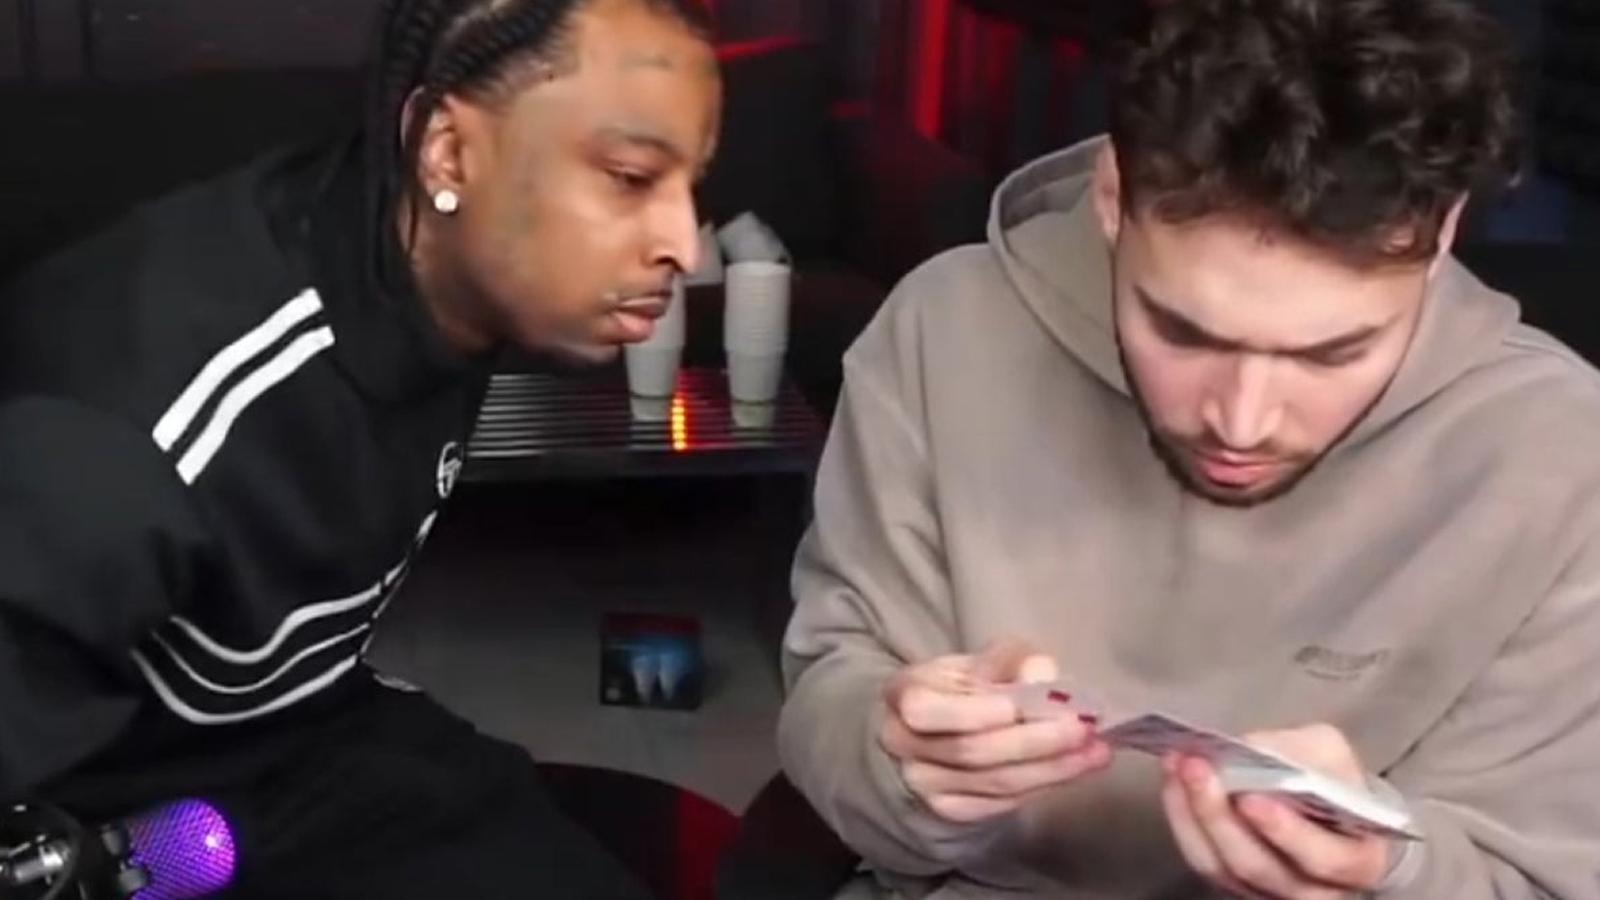 21 Savage accused by Adin Ross fans of cheating during gambling stream